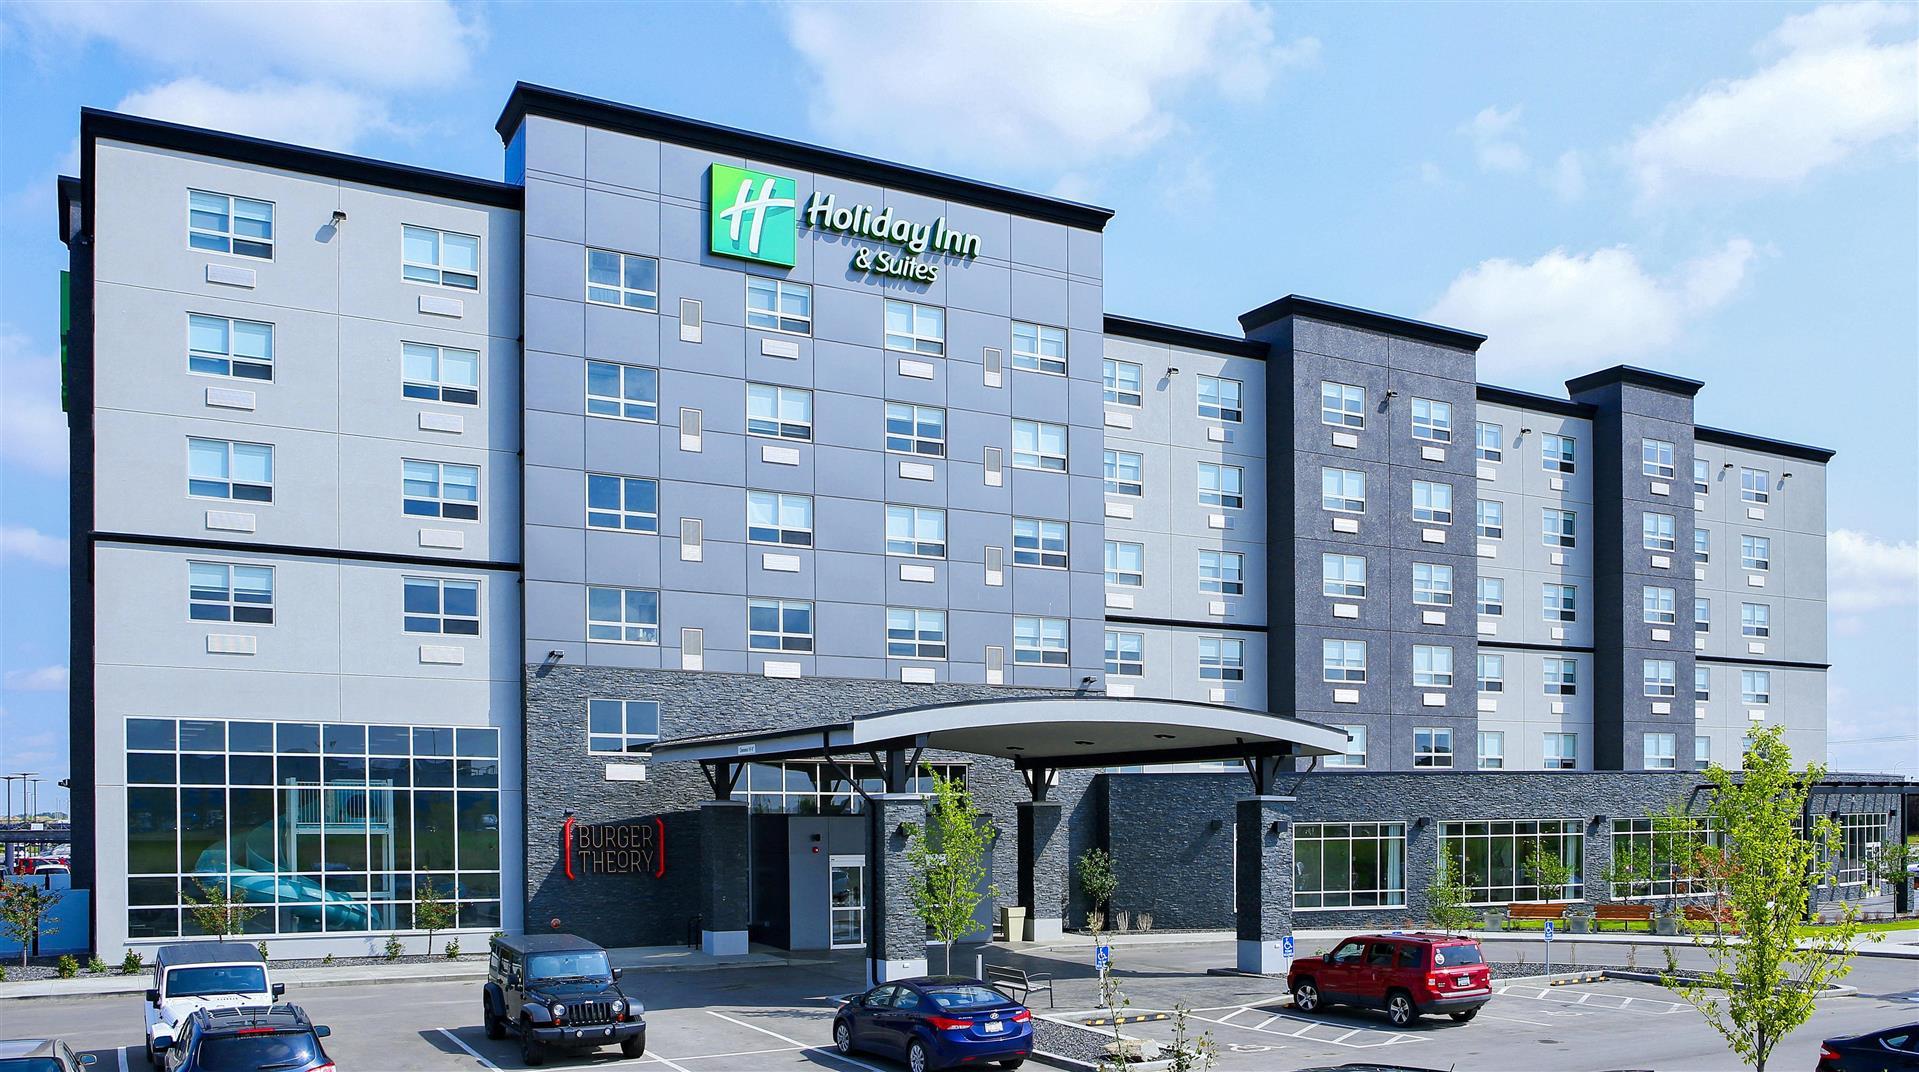 Holiday Inn Hotel & Suites Calgary Airport North in Calgary, AB